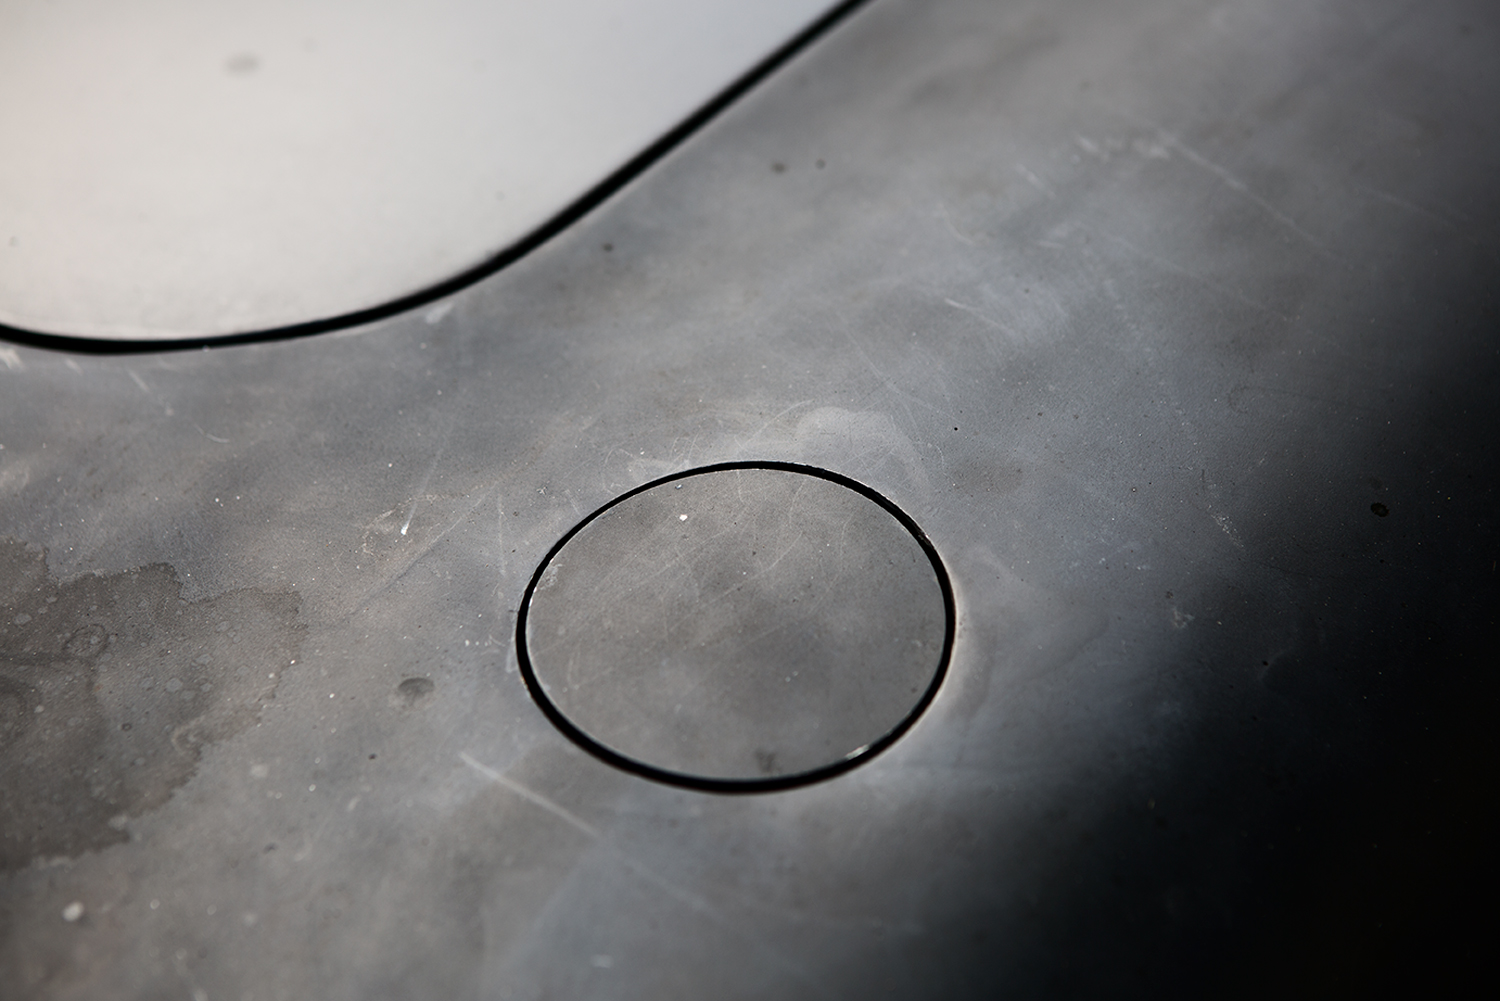 car_detail_black_and_grey_with_gas_tank_lid_web.jpg